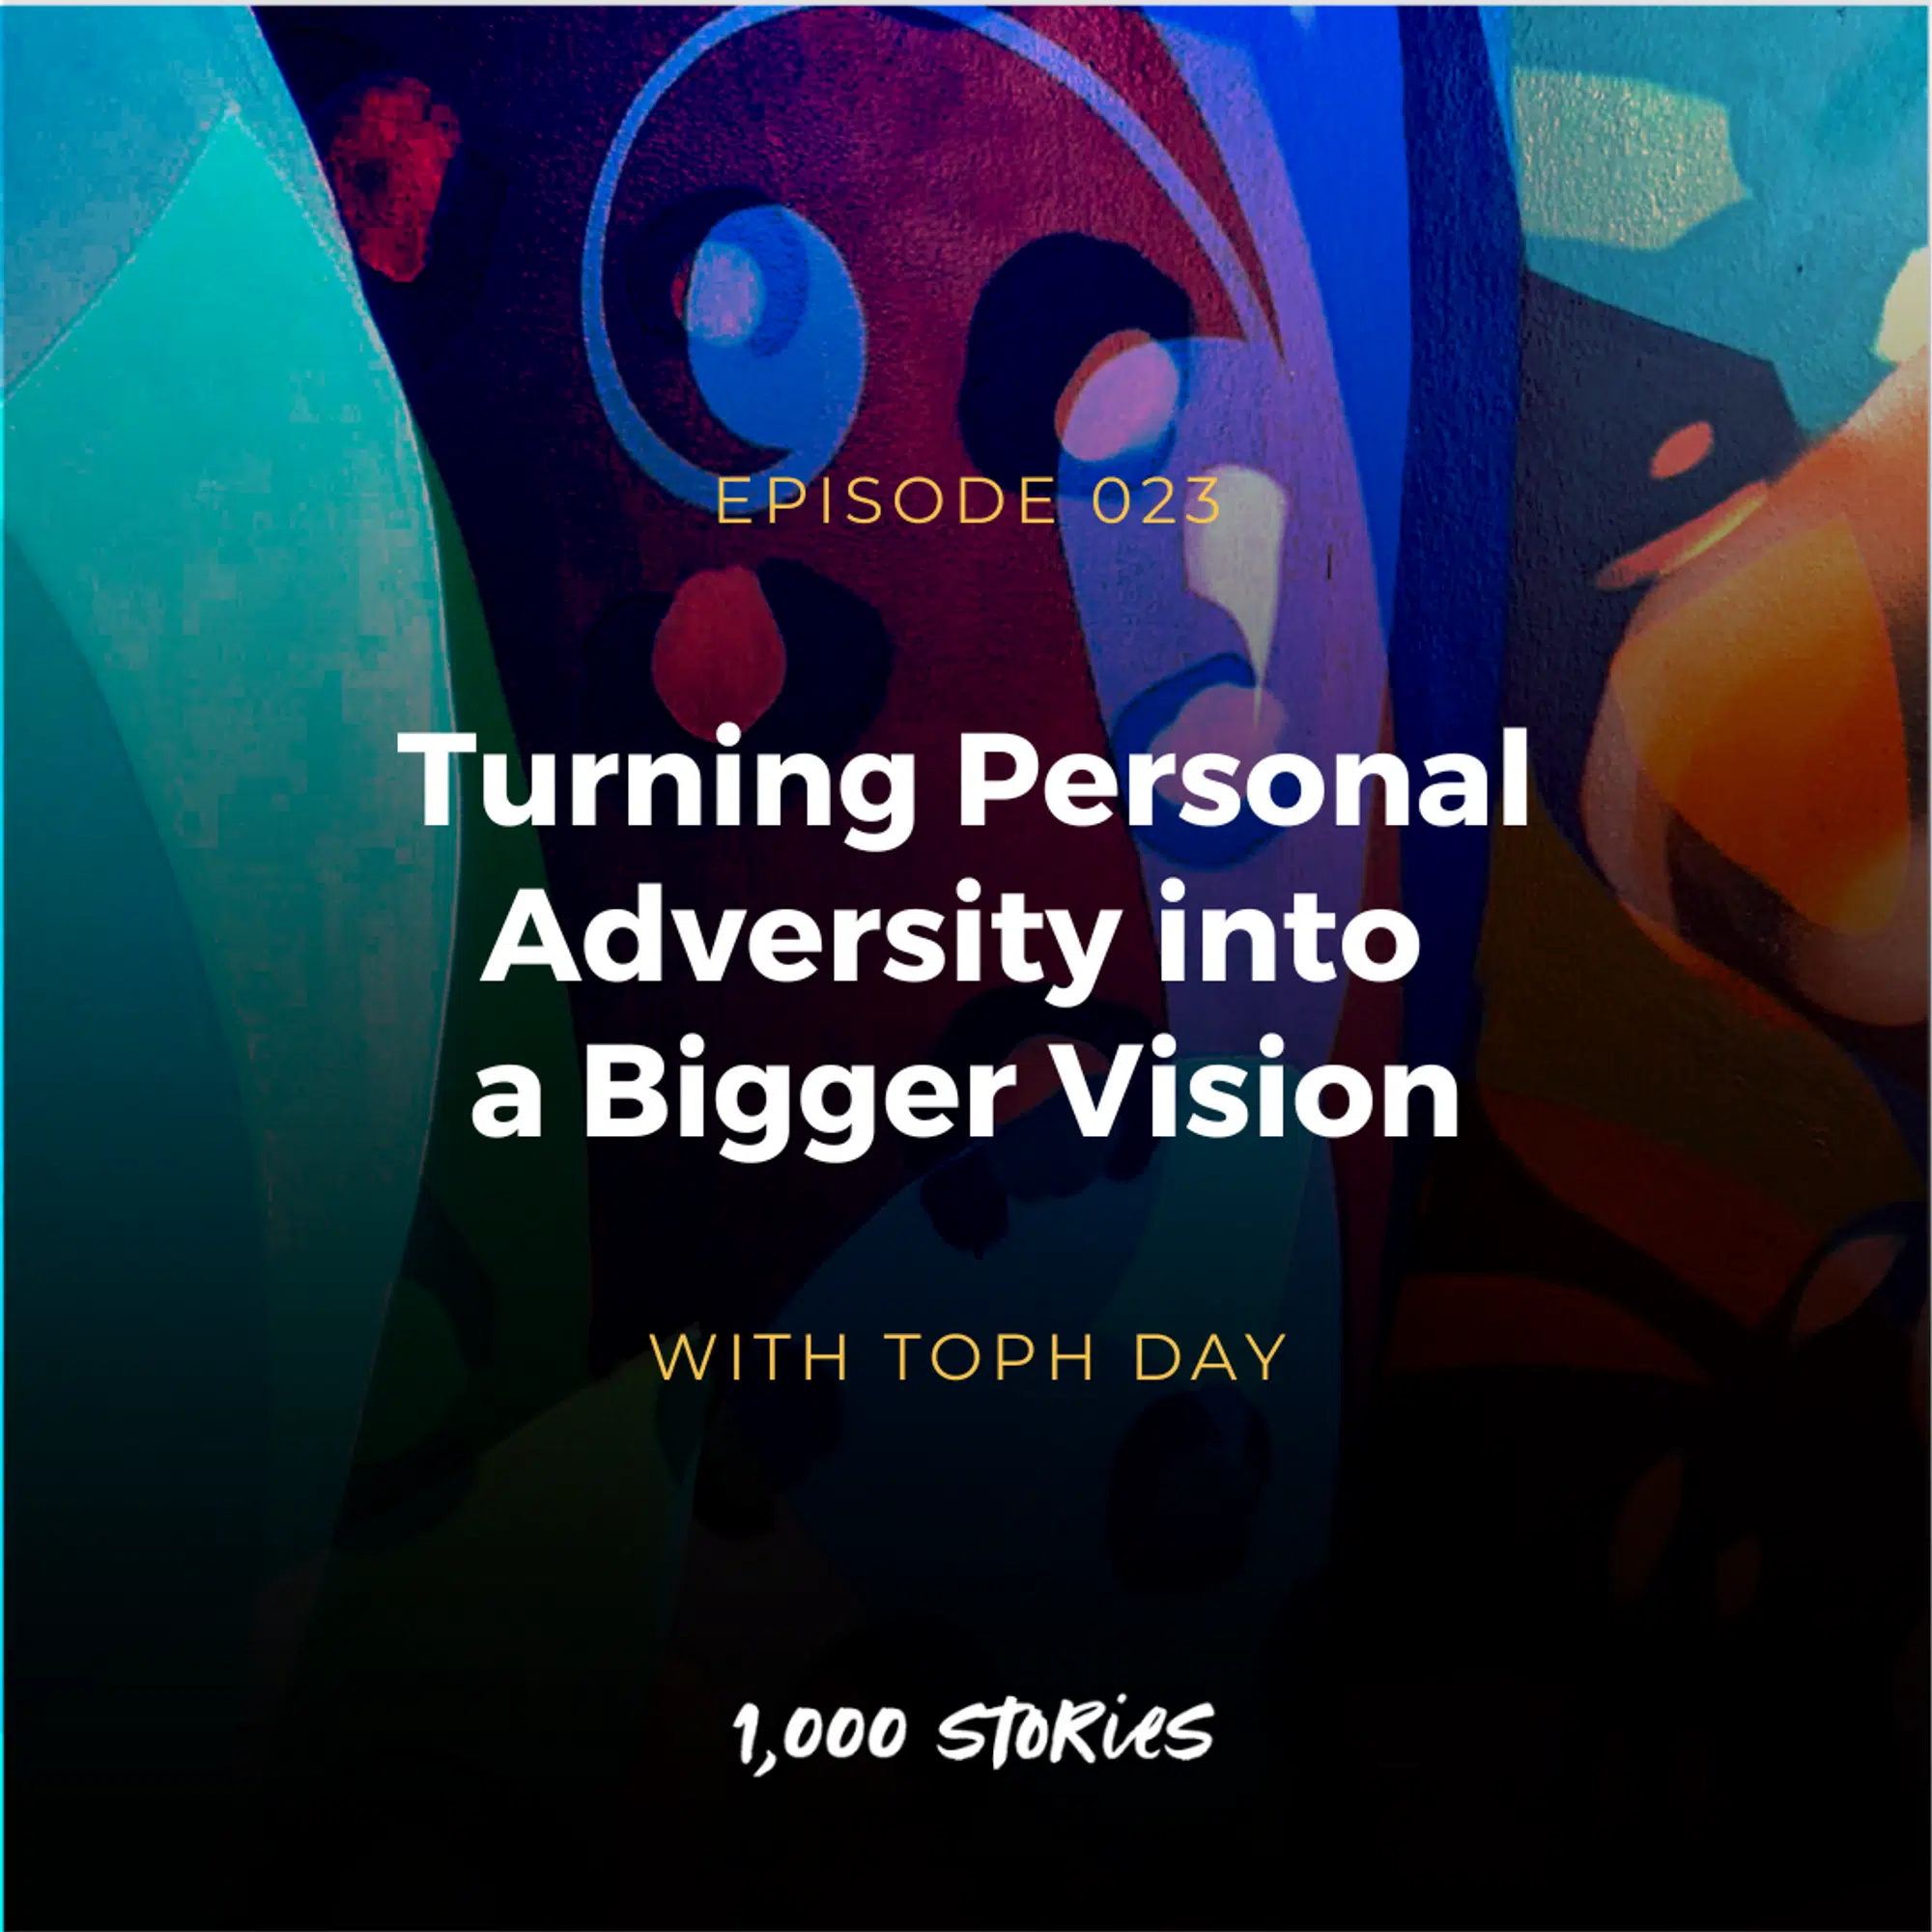 Turning Personal Adversity into a Bigger Vision with Toph Day